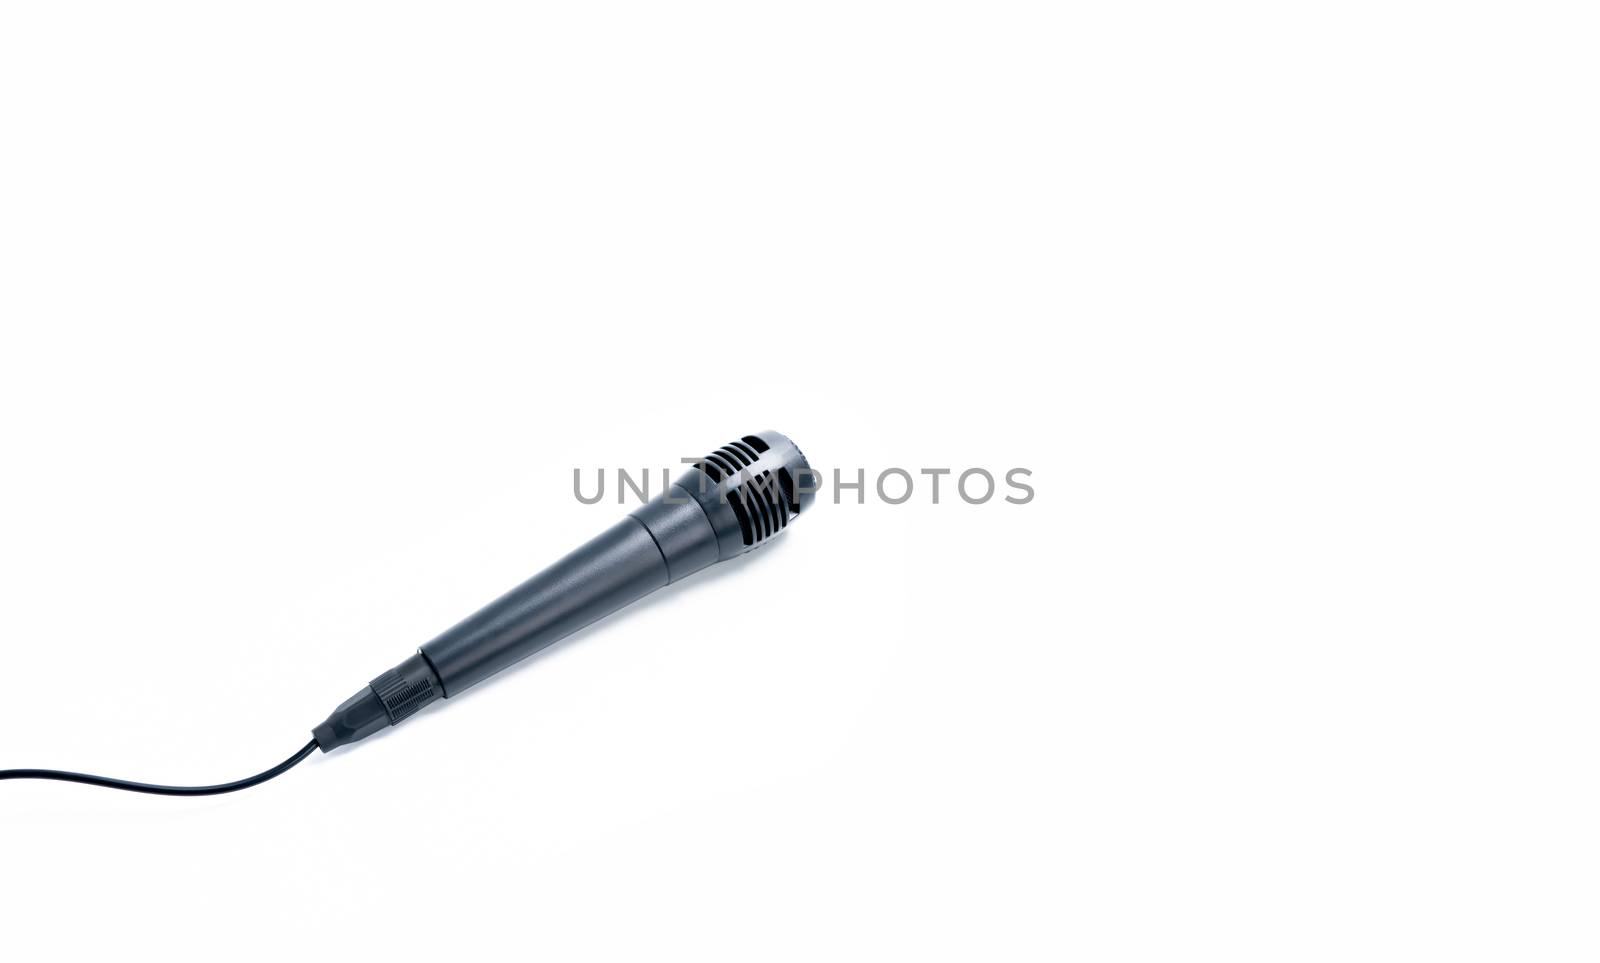 Black microphone on white background by Buttus_casso